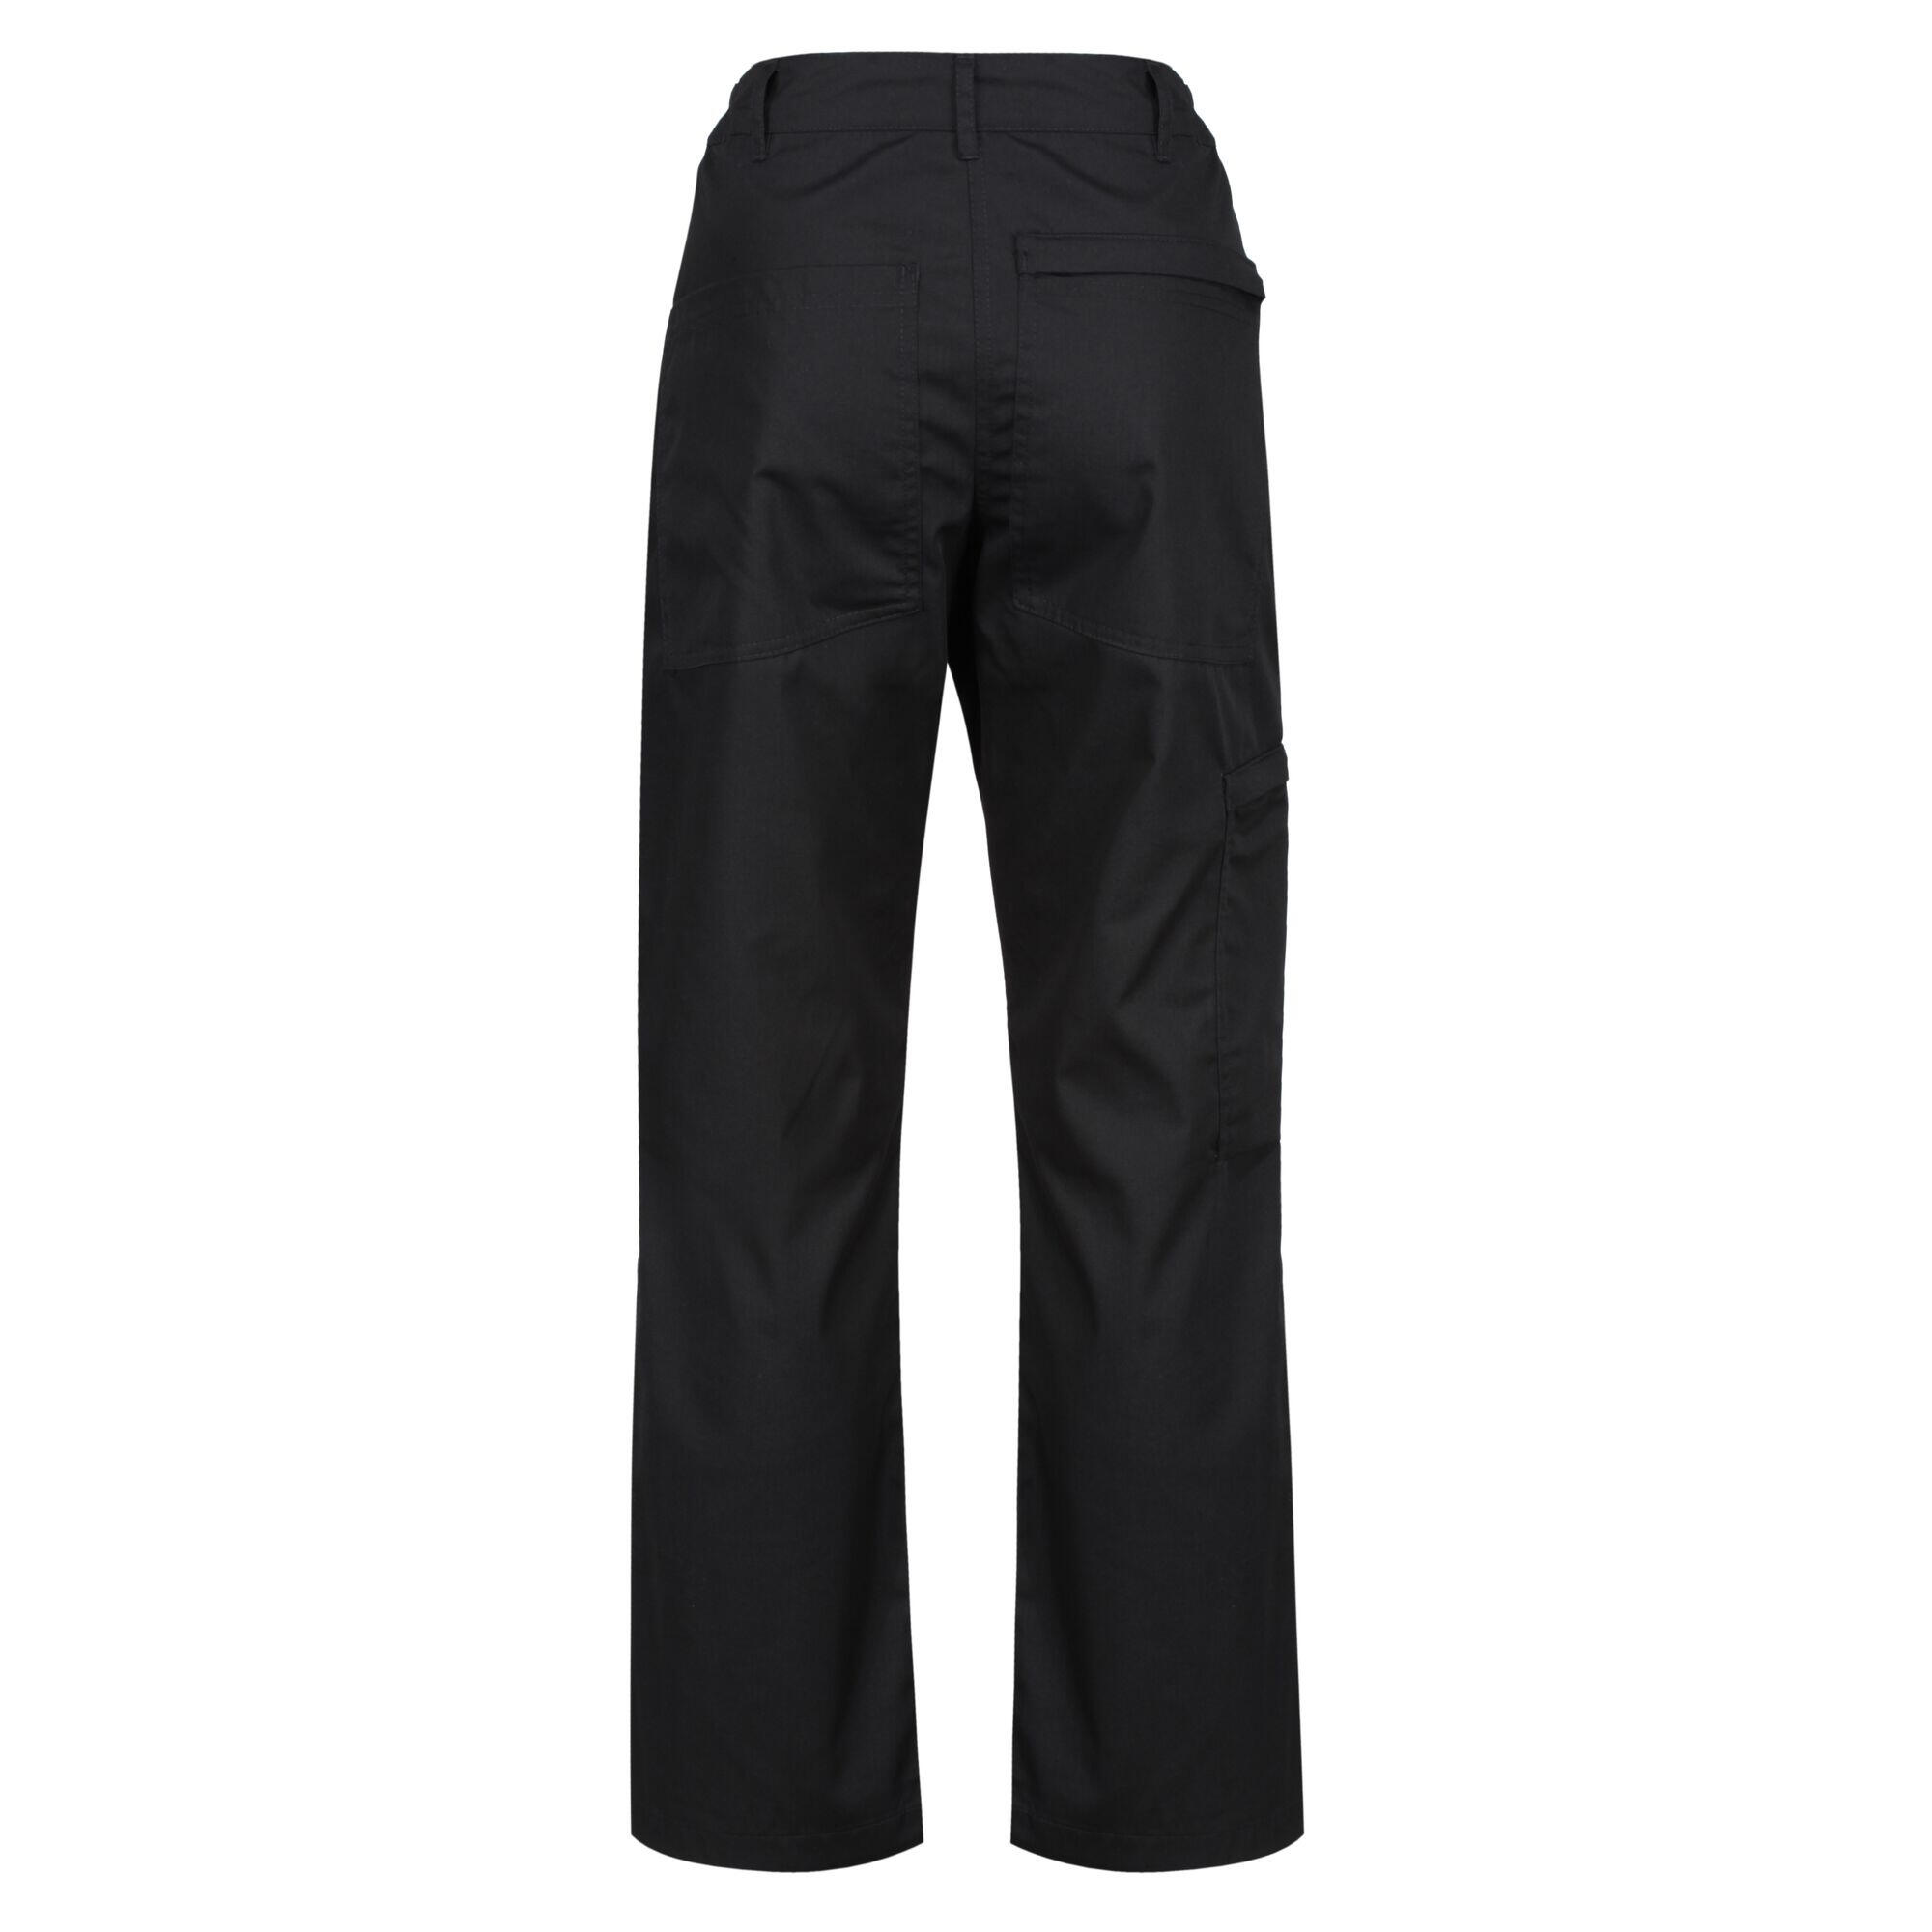 New Womens/Ladies Action Sports Trousers (Black) 2/4